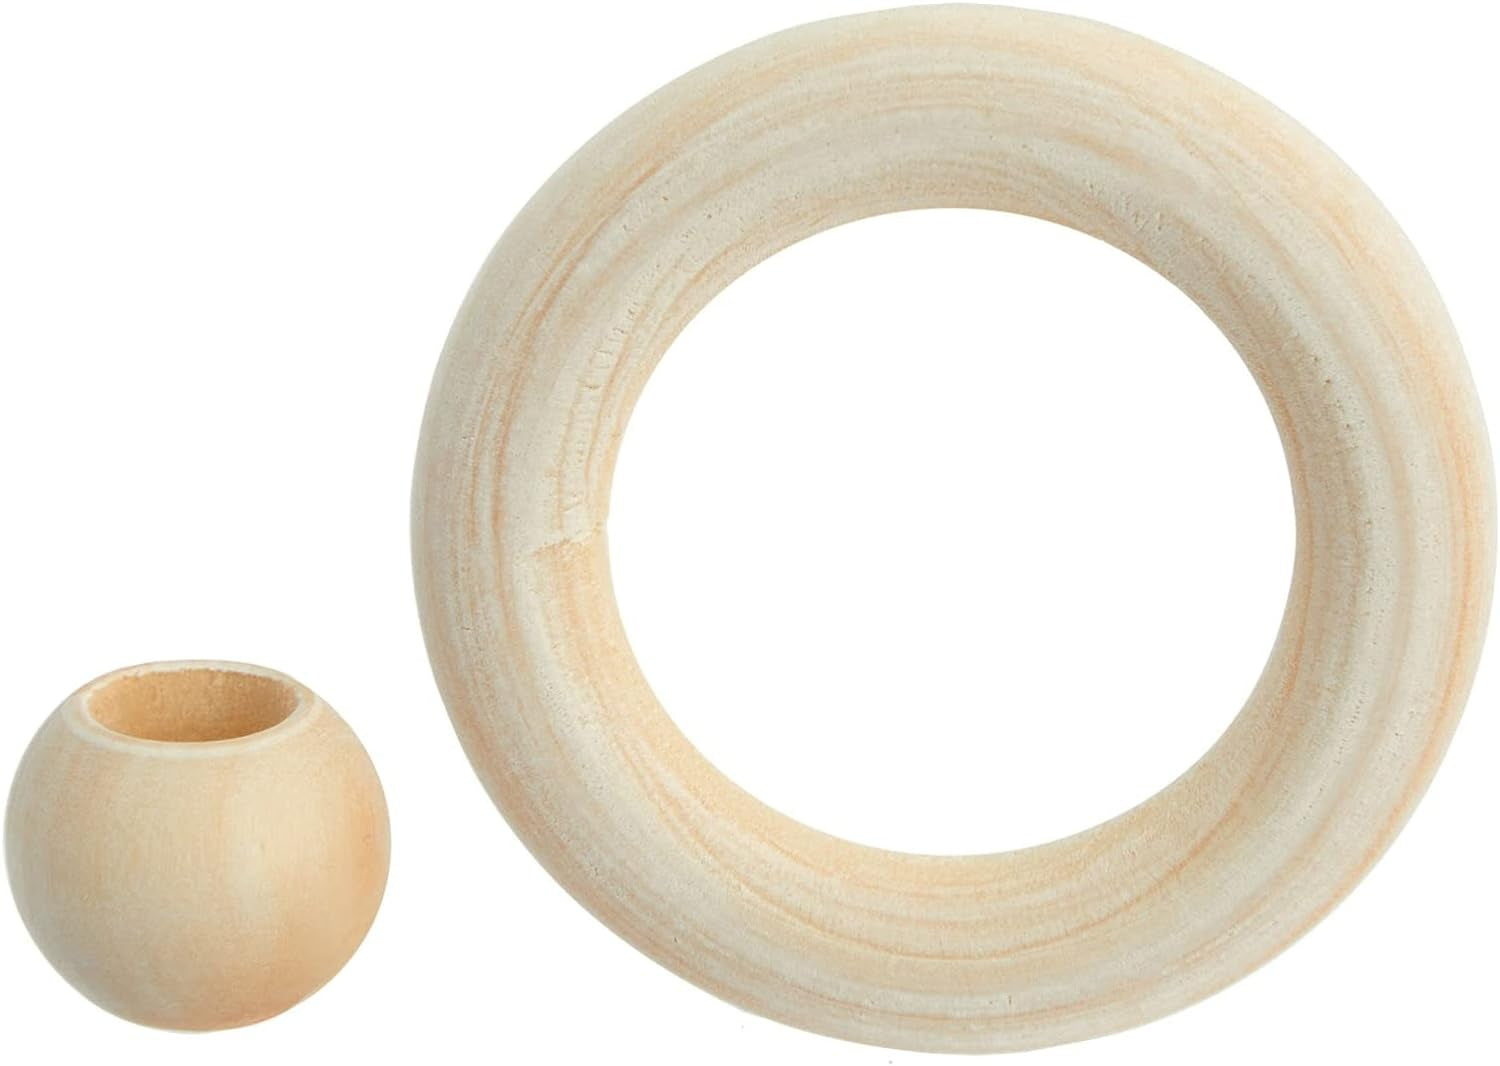 Set of 50 Wooden Beads and 30 Wood Rings for Macrame, DIY Pendant Connectors, Wall Hanging Craft (Rings 2.2 In/Beads 20Mm)